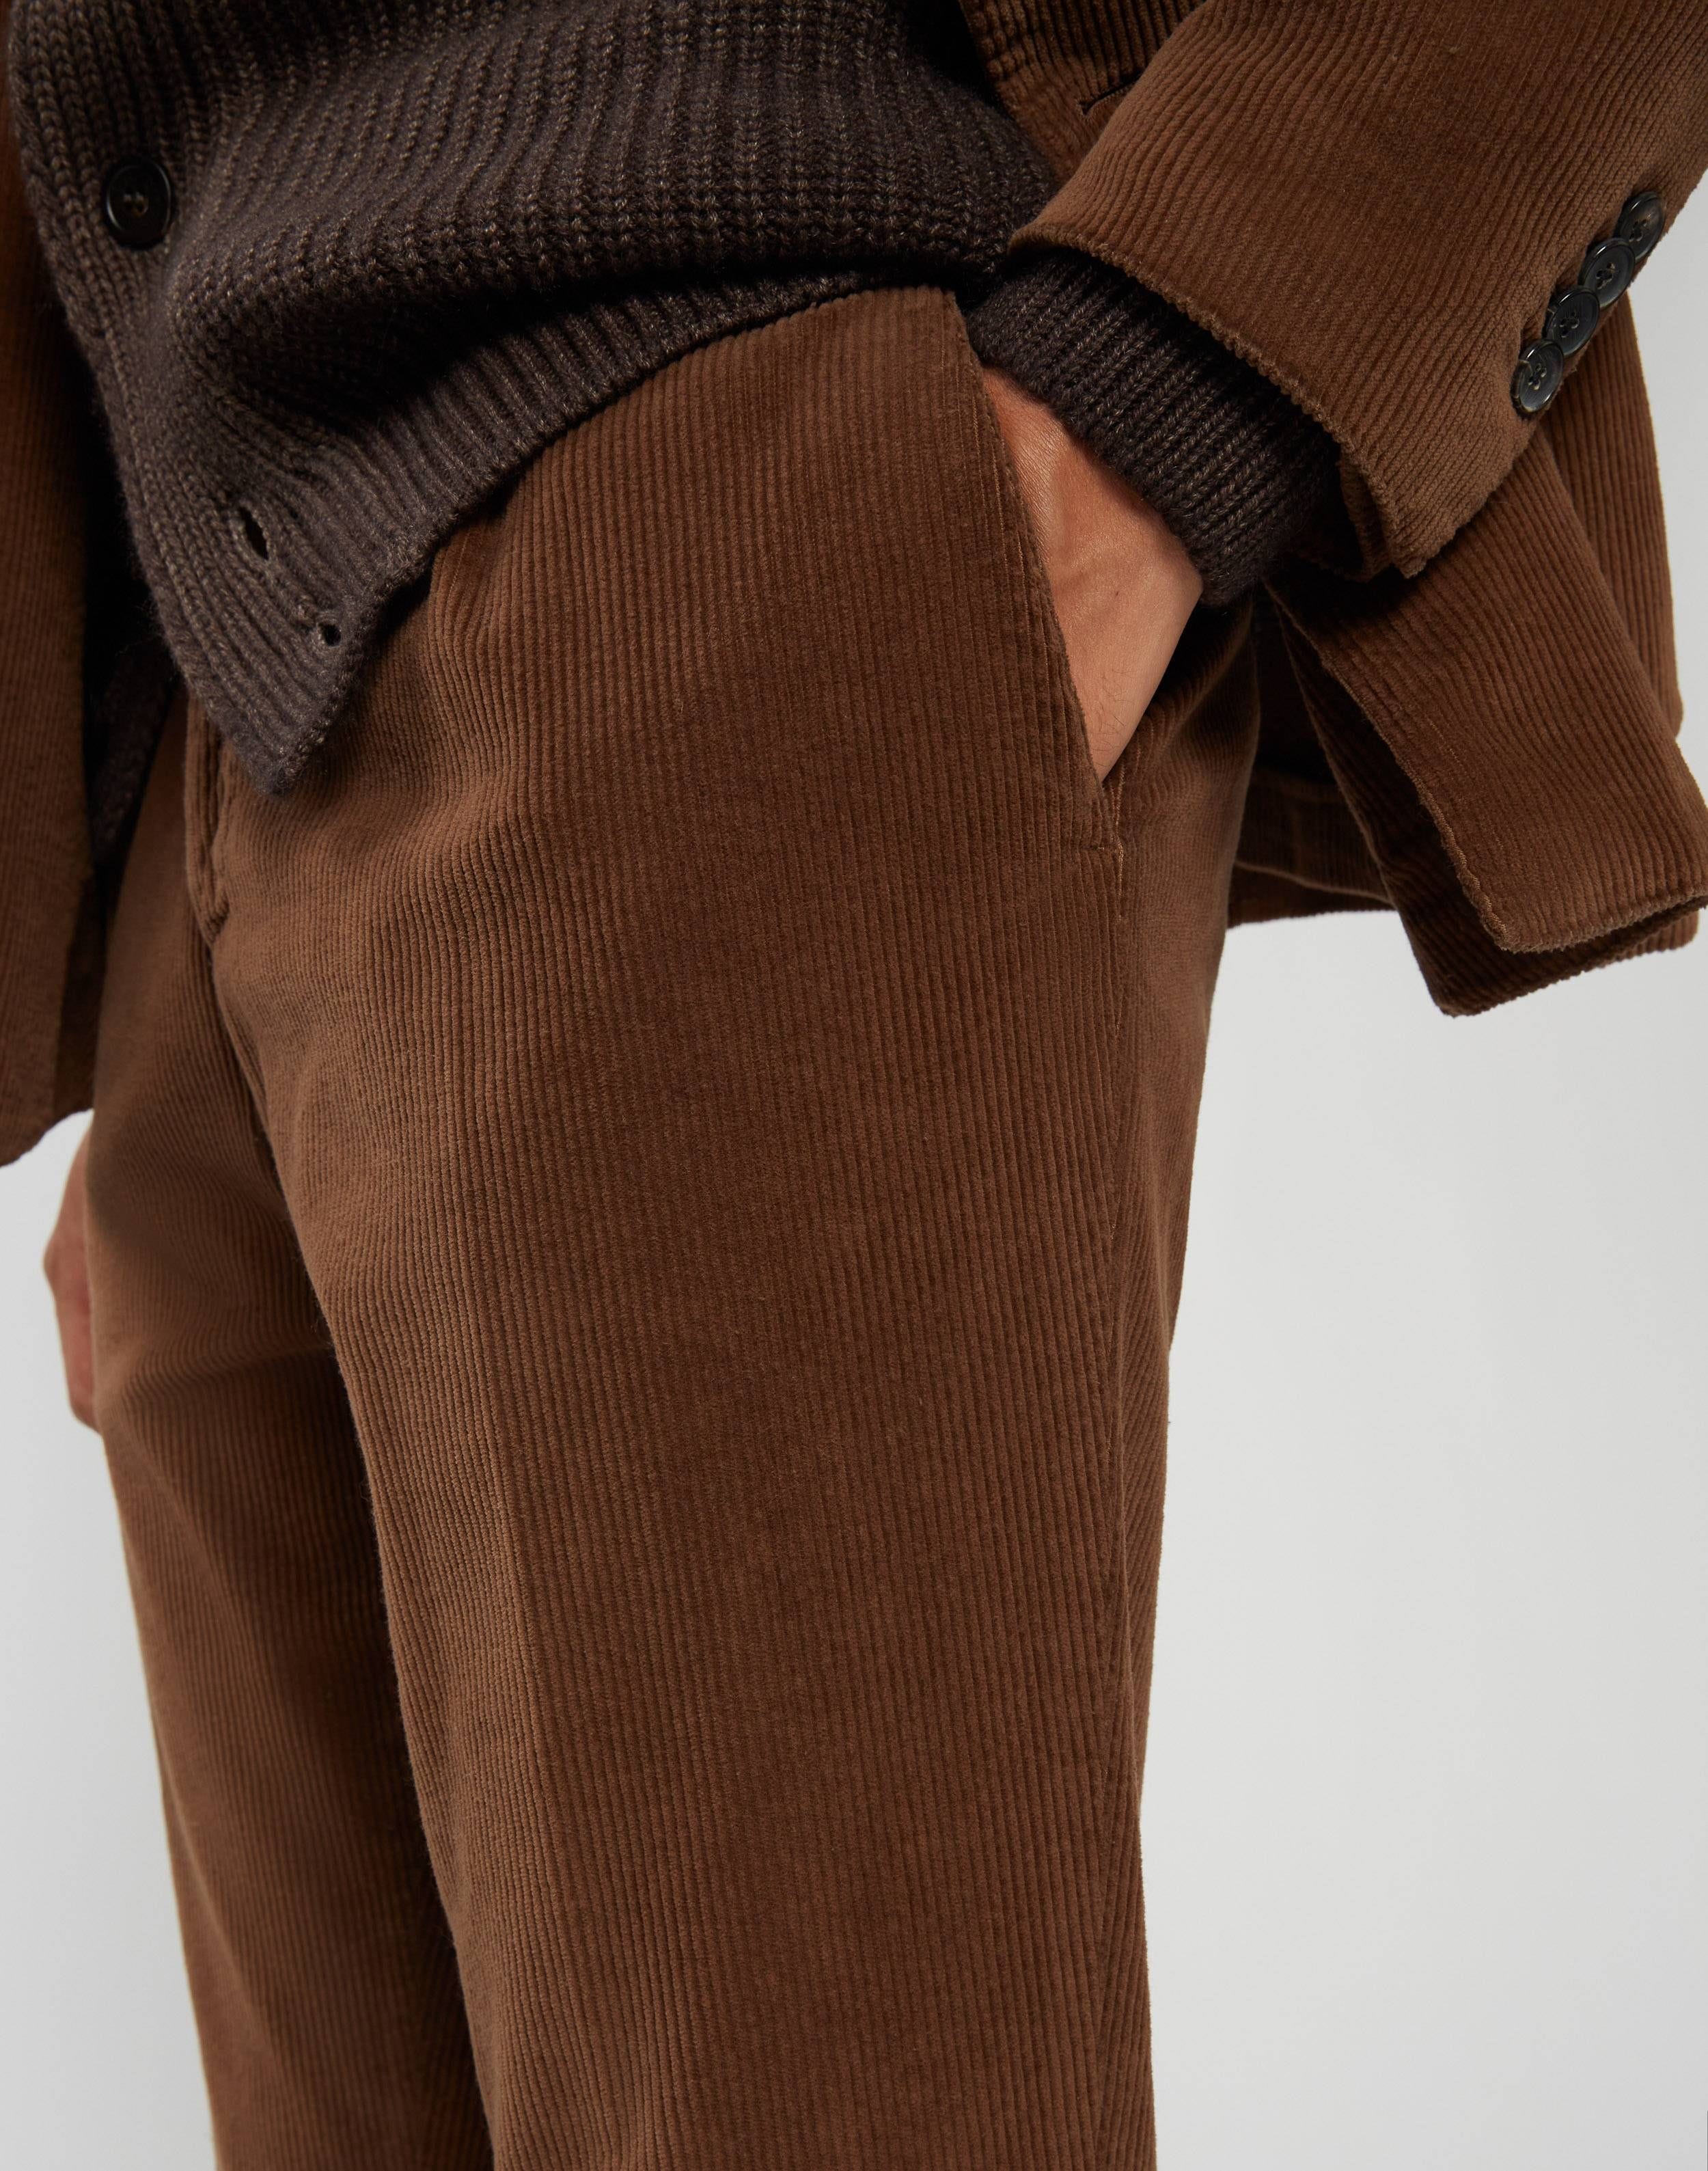 Suit in camel-brown corduroy - Supersoft 